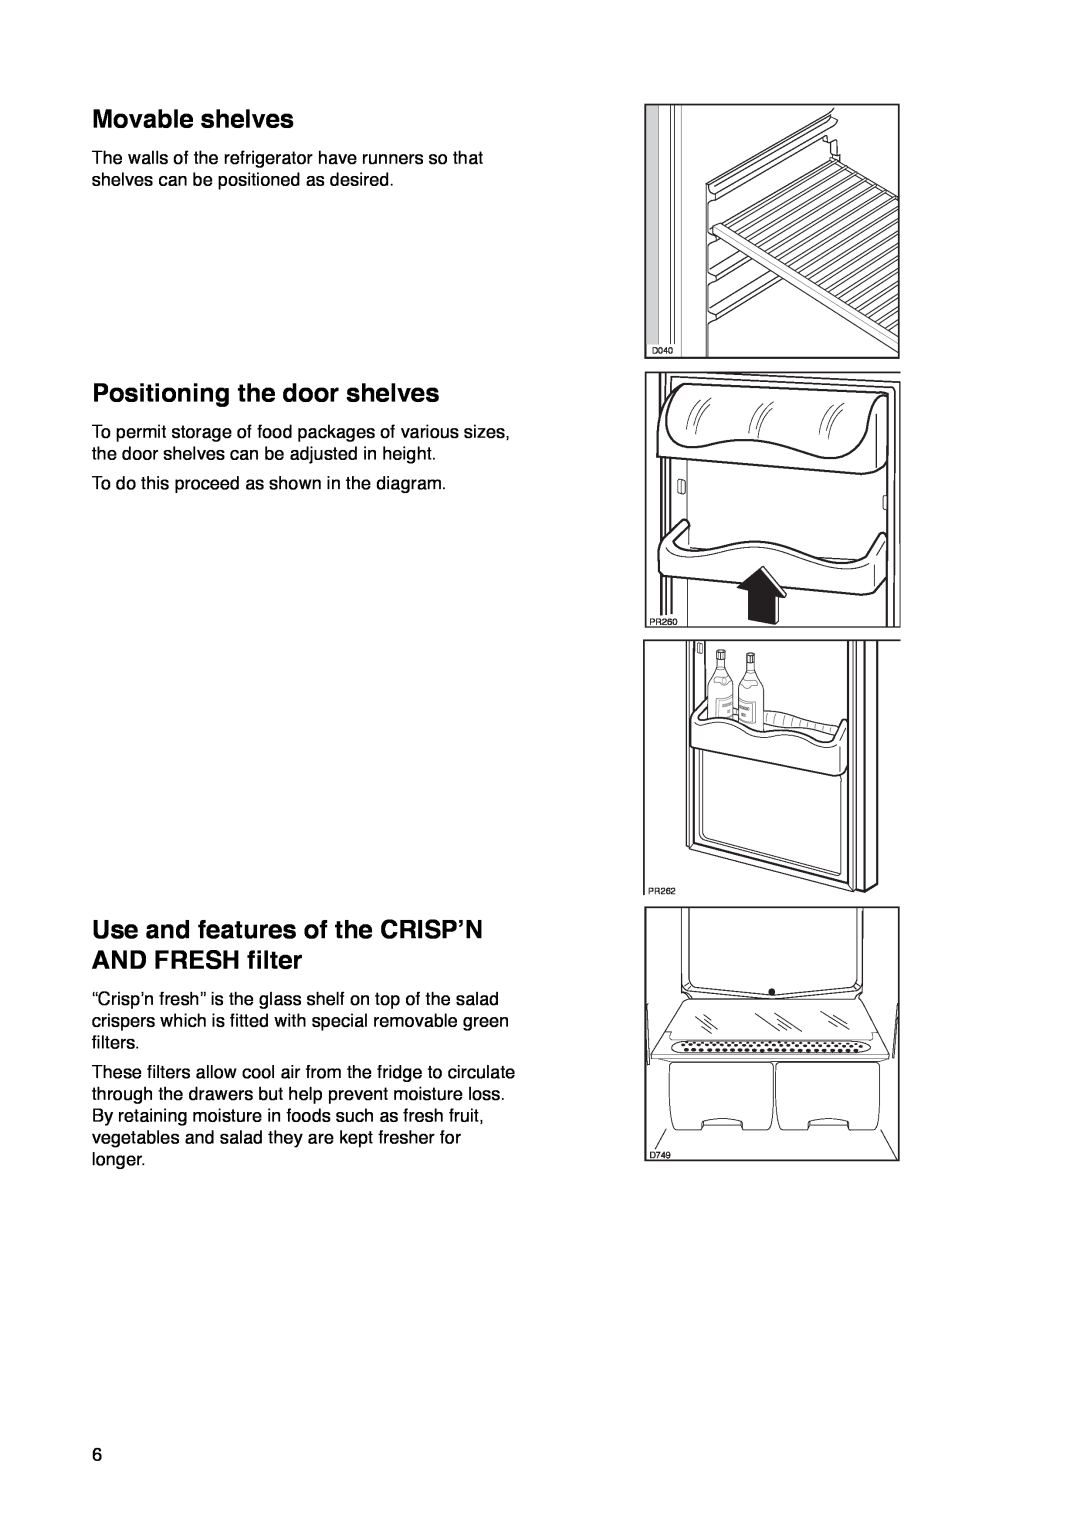 Zanussi ZC 85 L manual Movable shelves, Positioning the door shelves, Use and features of the CRISPÕN AND FRESH filter 